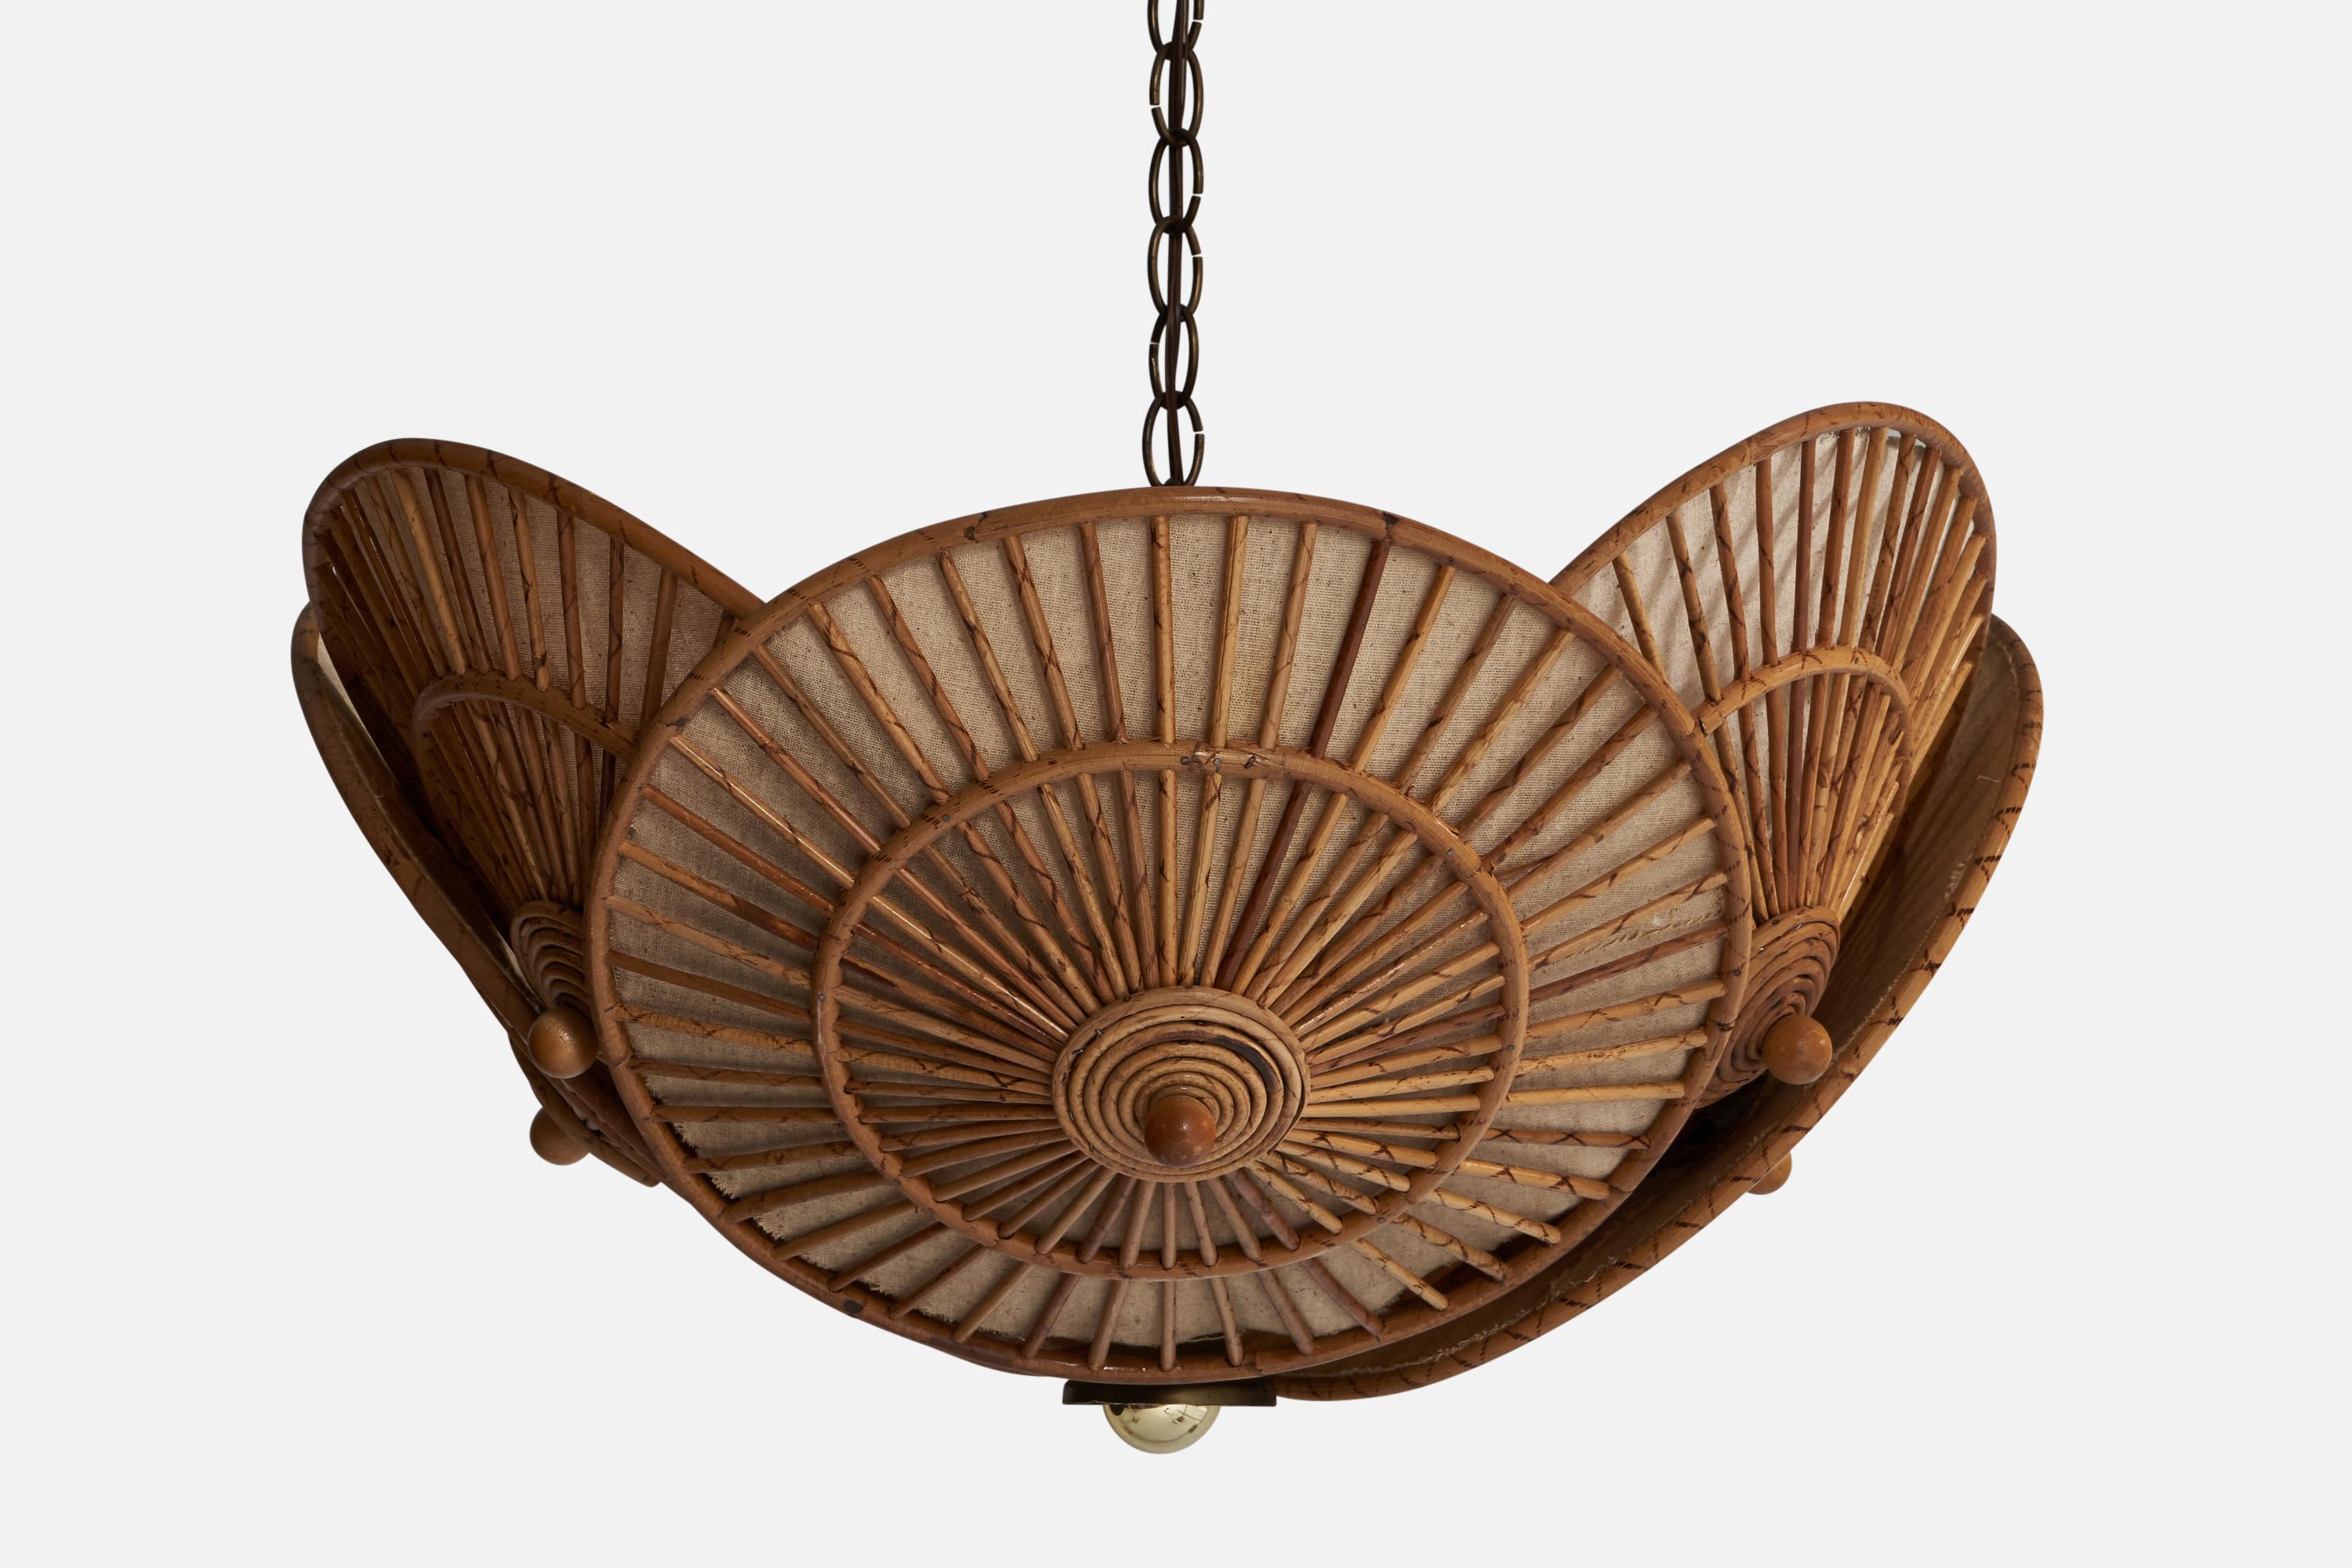 A wood, moulded bamboo and raffia pendant light designed and produced in the US, 1950s.

Dimensions of canopy (inches): n/a, hangs via a chain
Socket takes standard E-26 bulbs. 2 sockets.There is no maximum wattage stated on the fixture. All